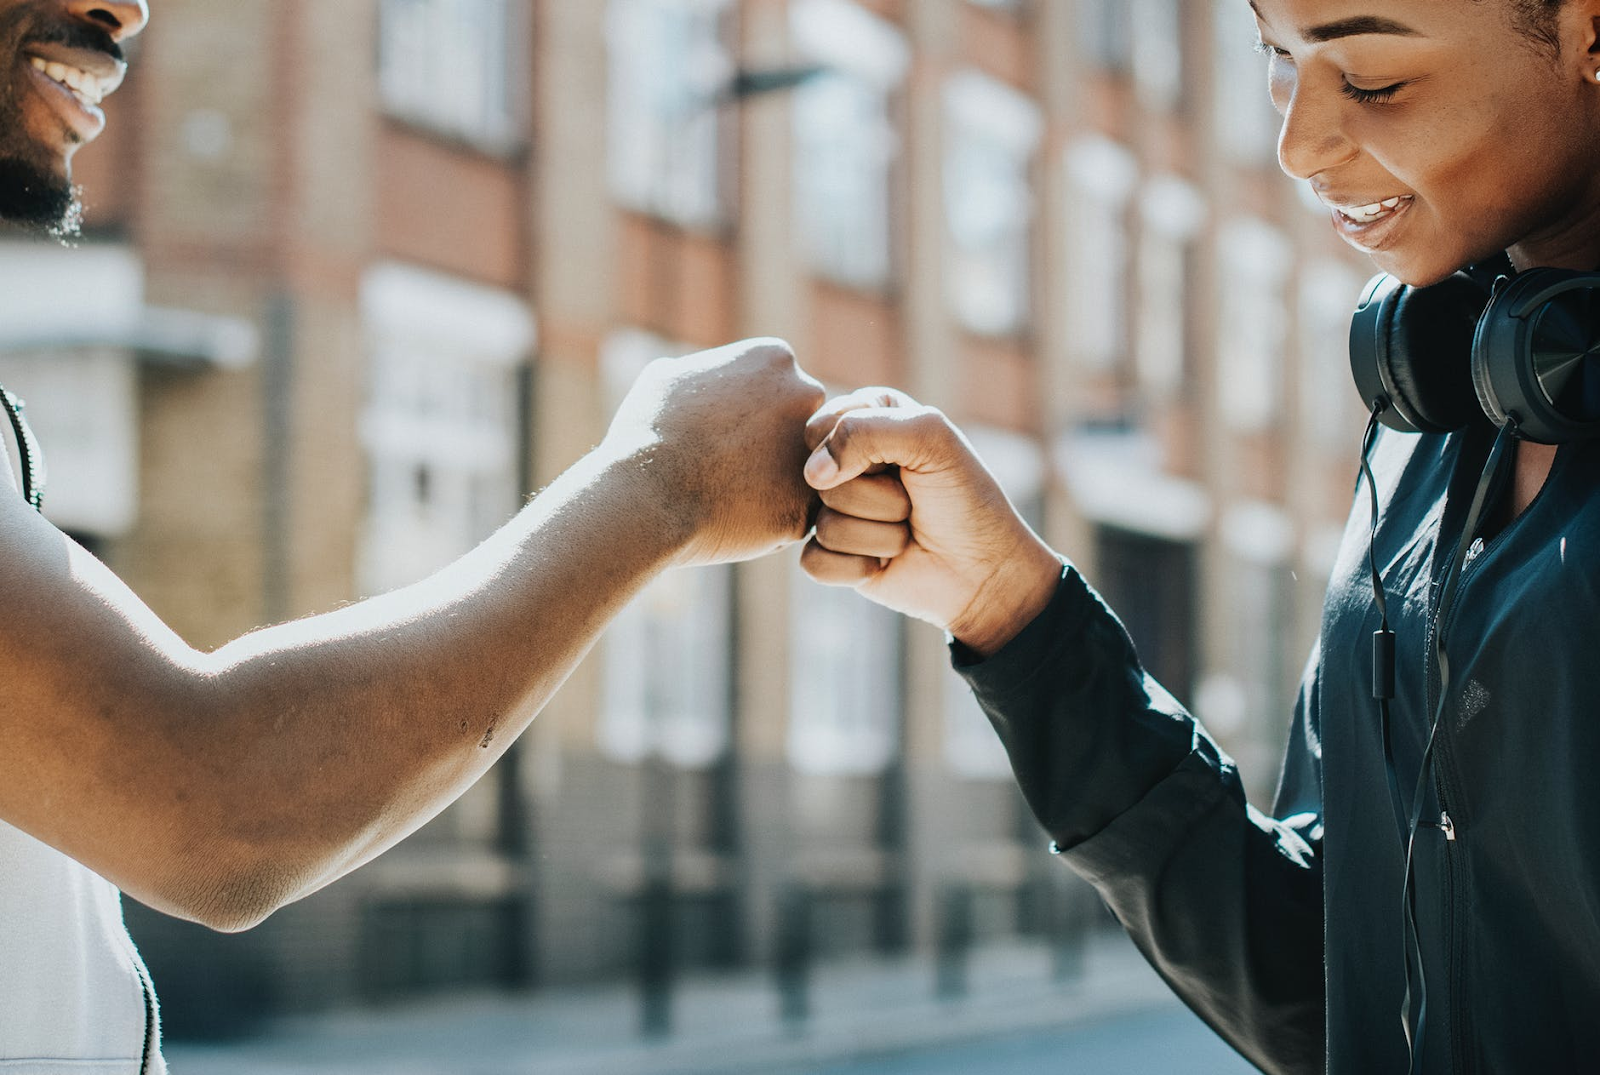 fist bump between a woman and a man